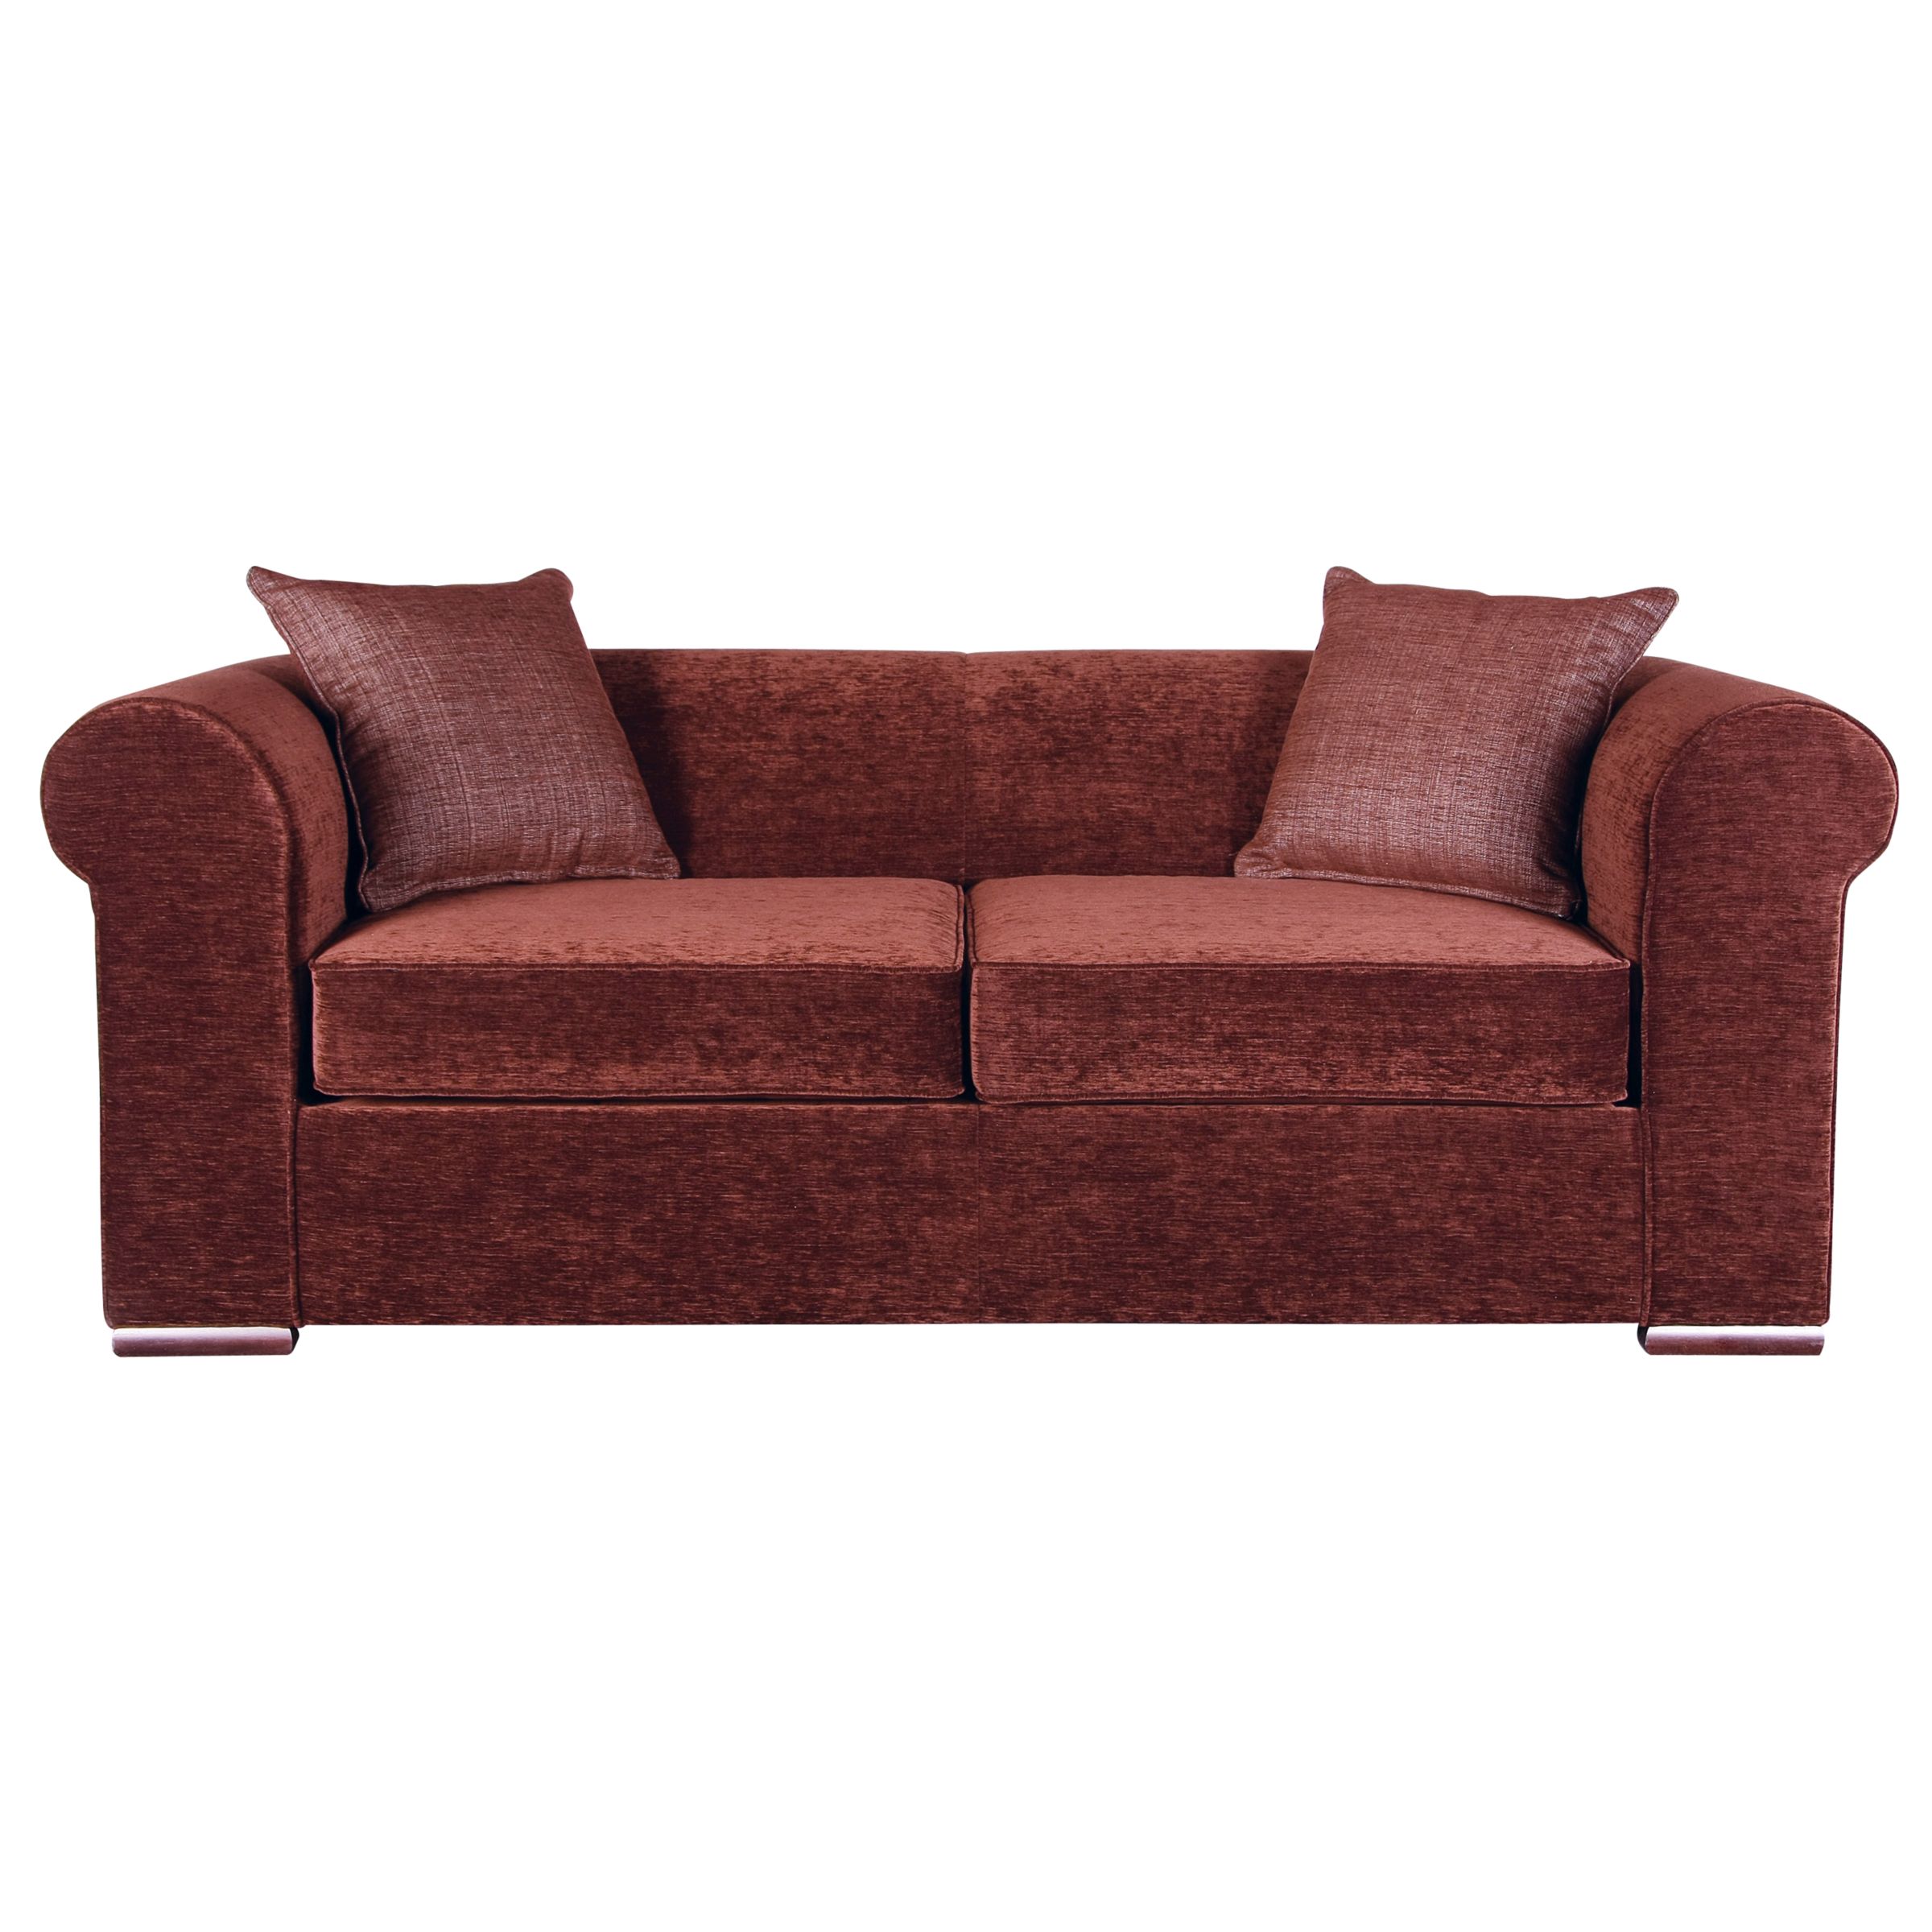 Chilton Large Sofa Bed with Sprung